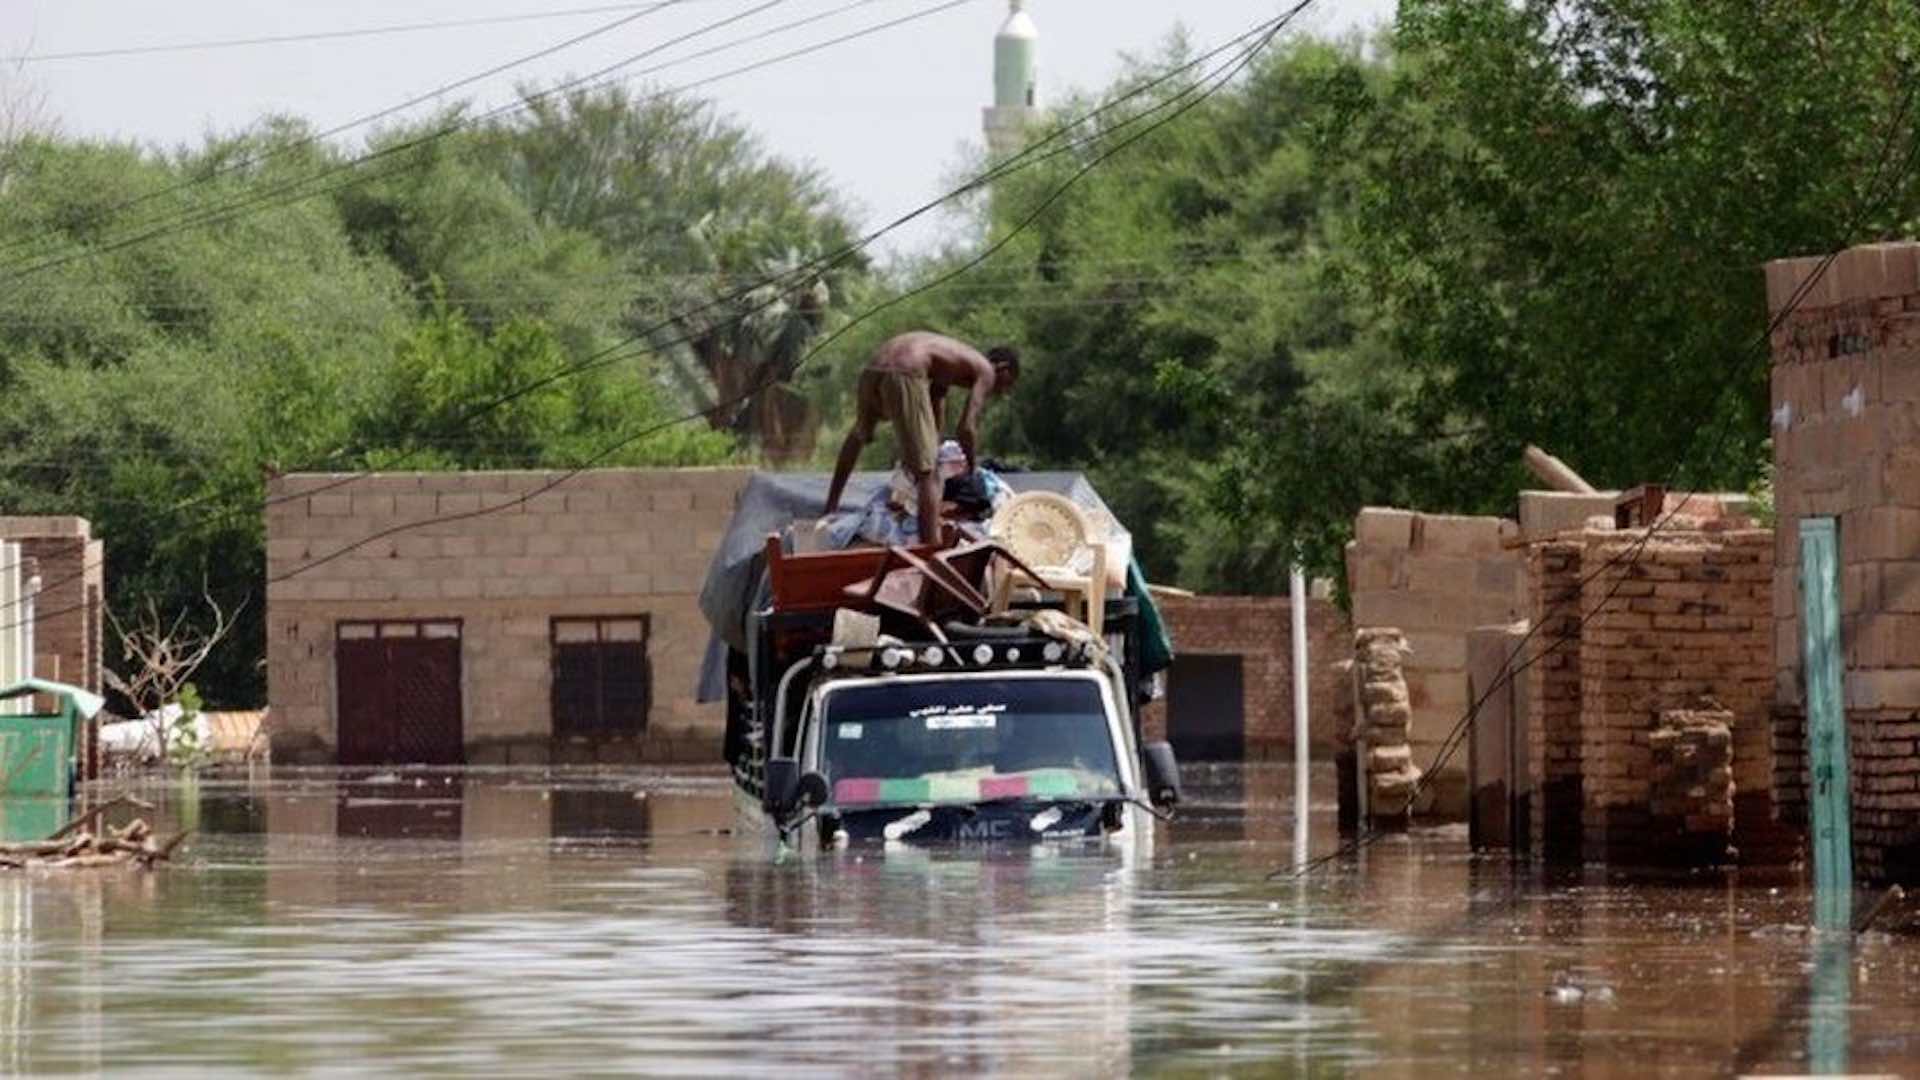 Floods in Sudan kill over 52 people and destroy thousands of homes